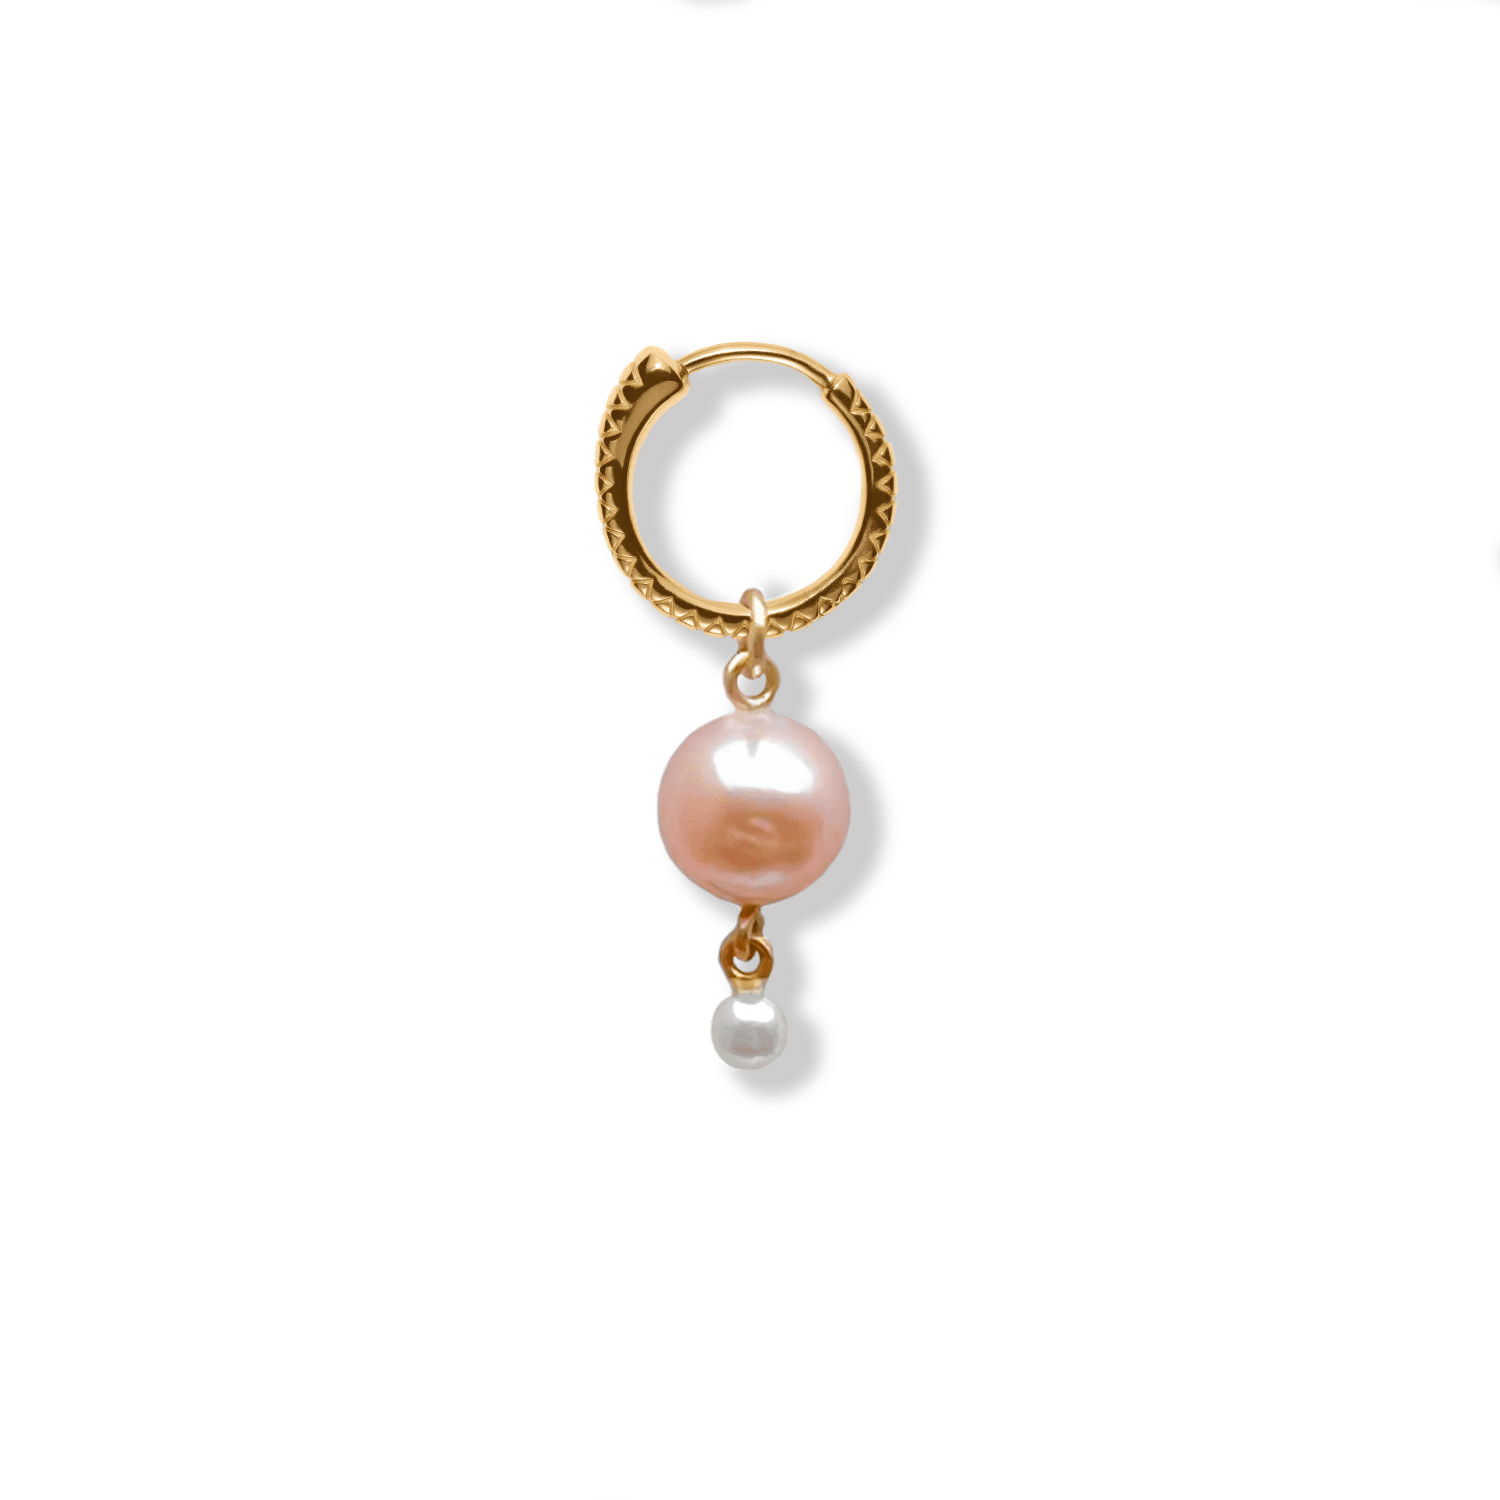 PENDANT TWO PEARL pink pearl pendant for earrings